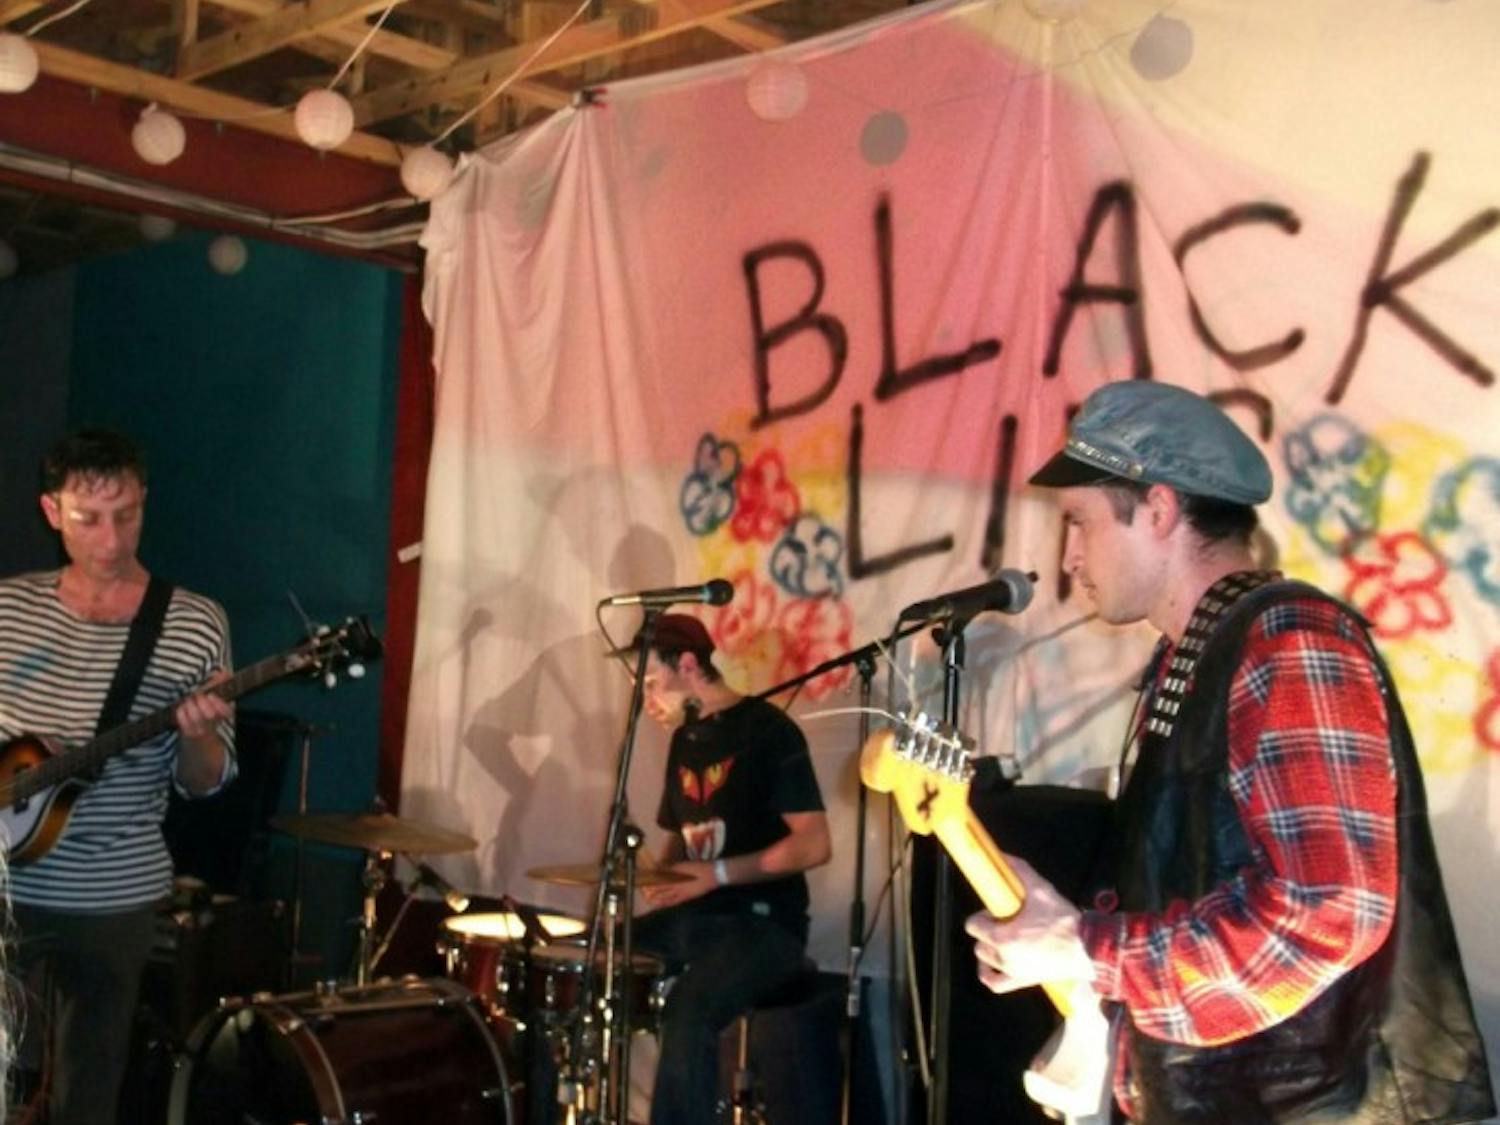 On Saturday, the Atlanta punk band, best known for its druggy, unfiltered lyrics and wild stage antics, lived up to its reputation during a sold-out set at The Back Yard in downtown Gainesville.